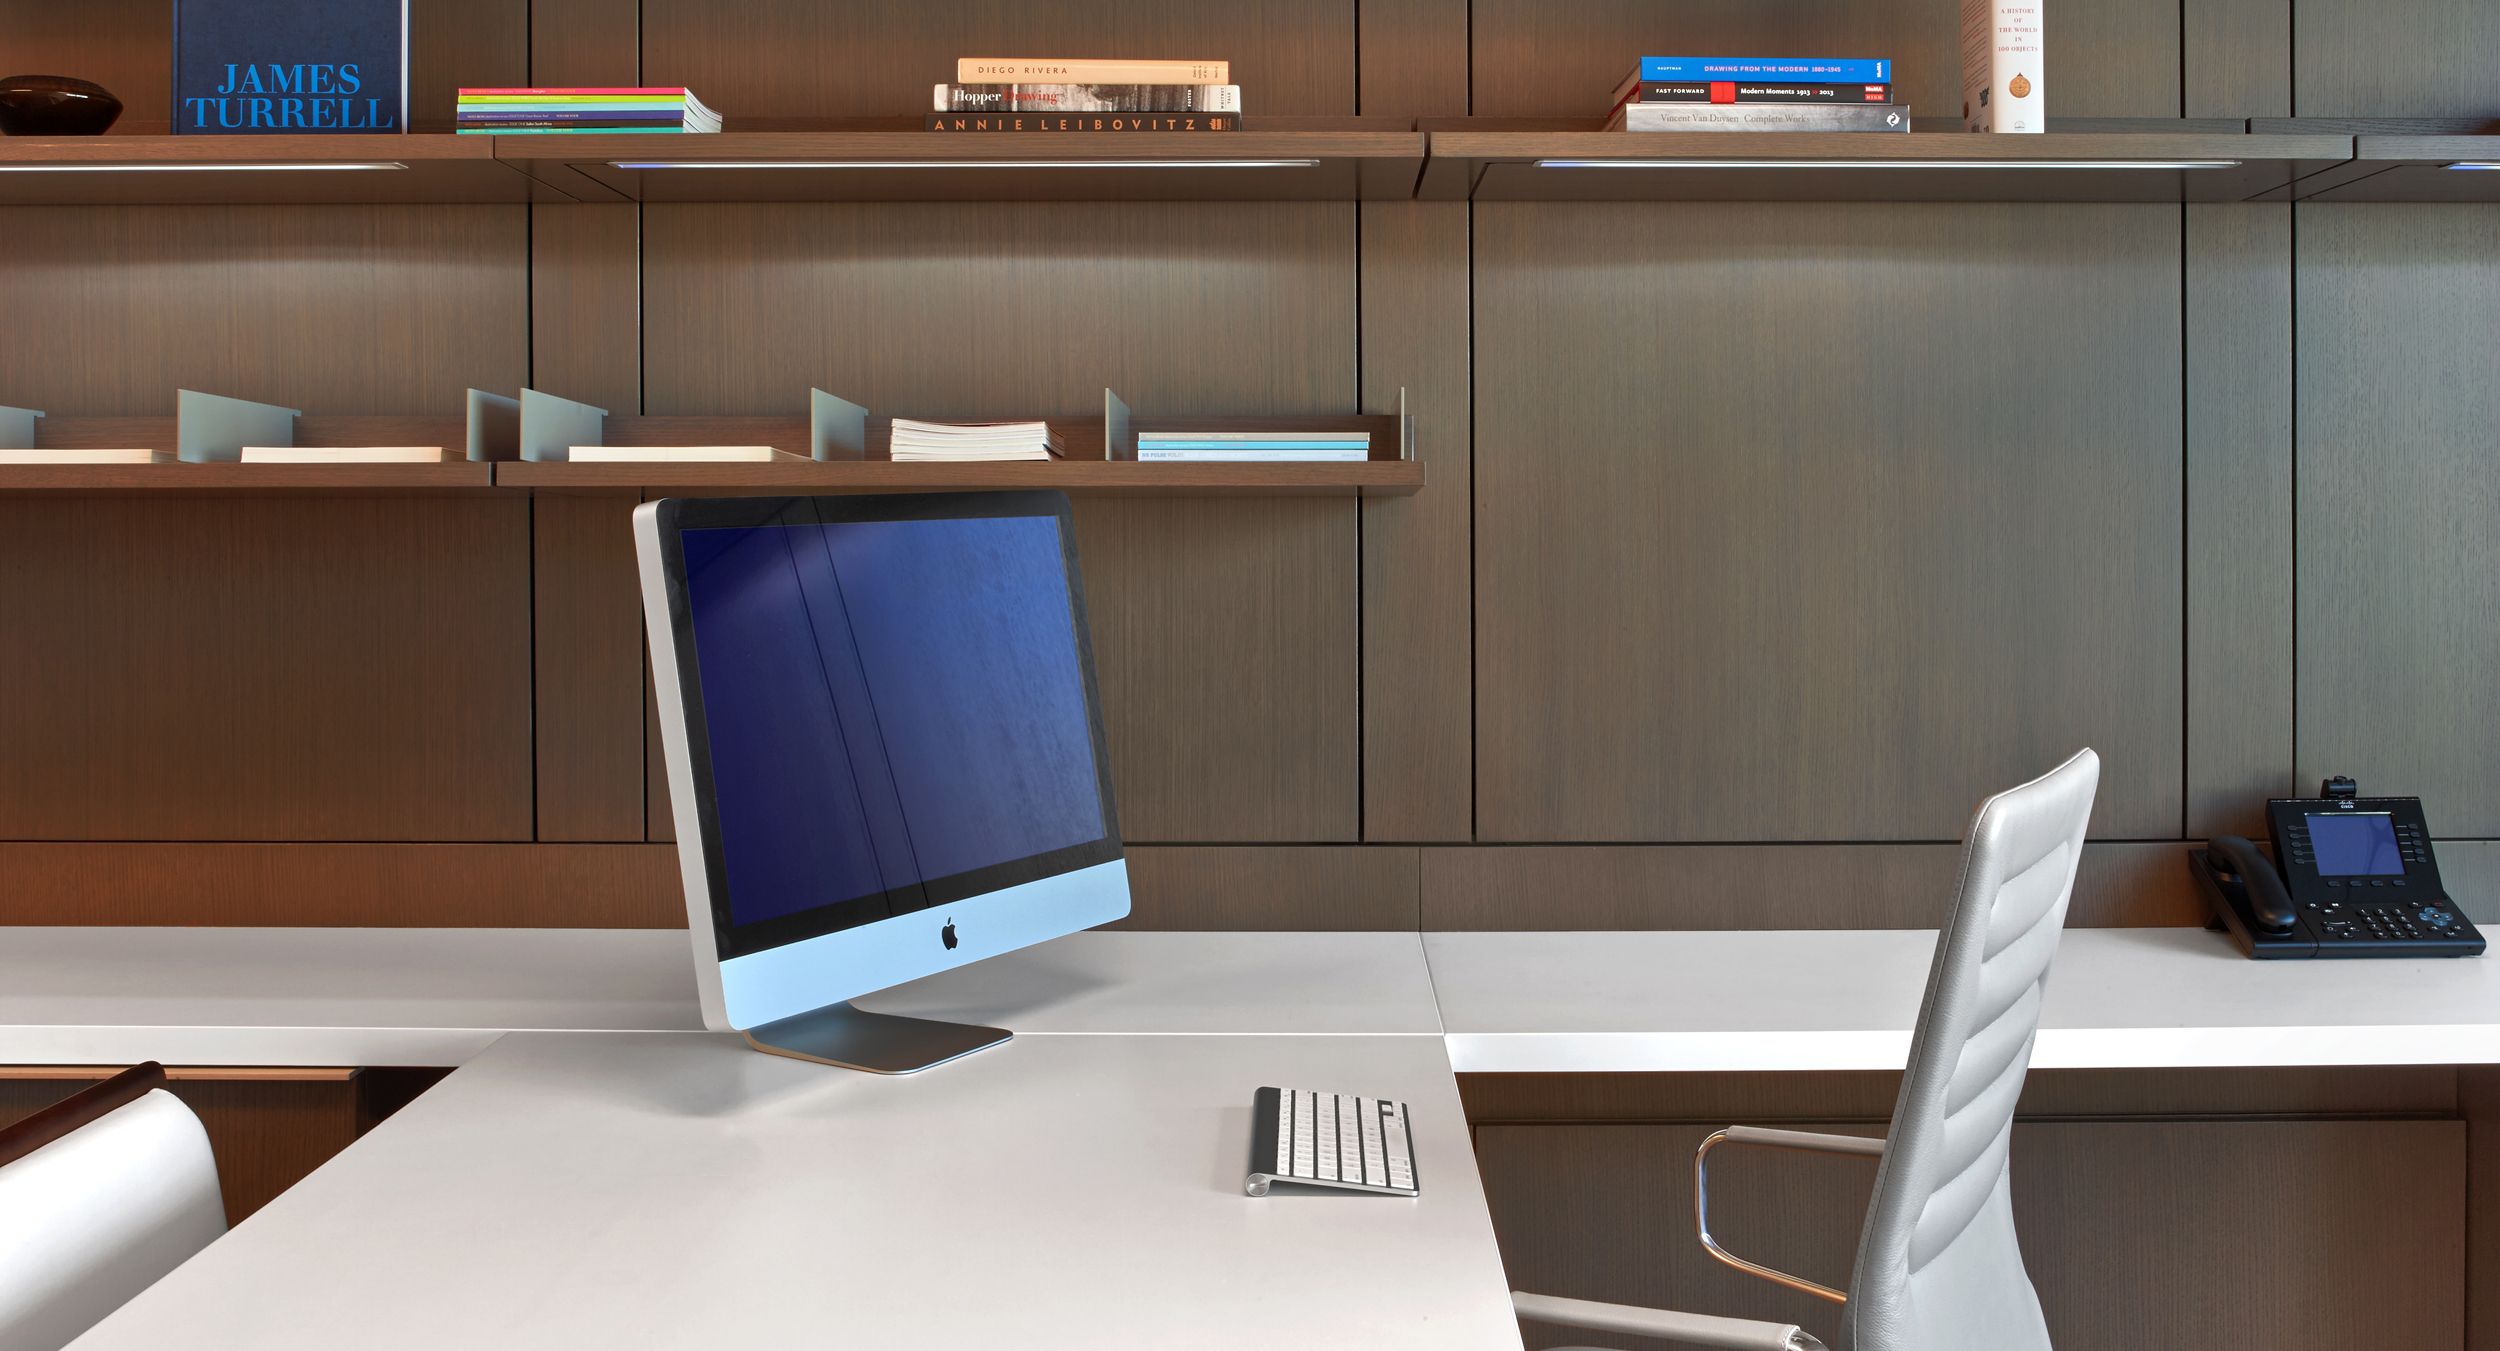 Open shelving is fully-adjustable with integral LED lighting.